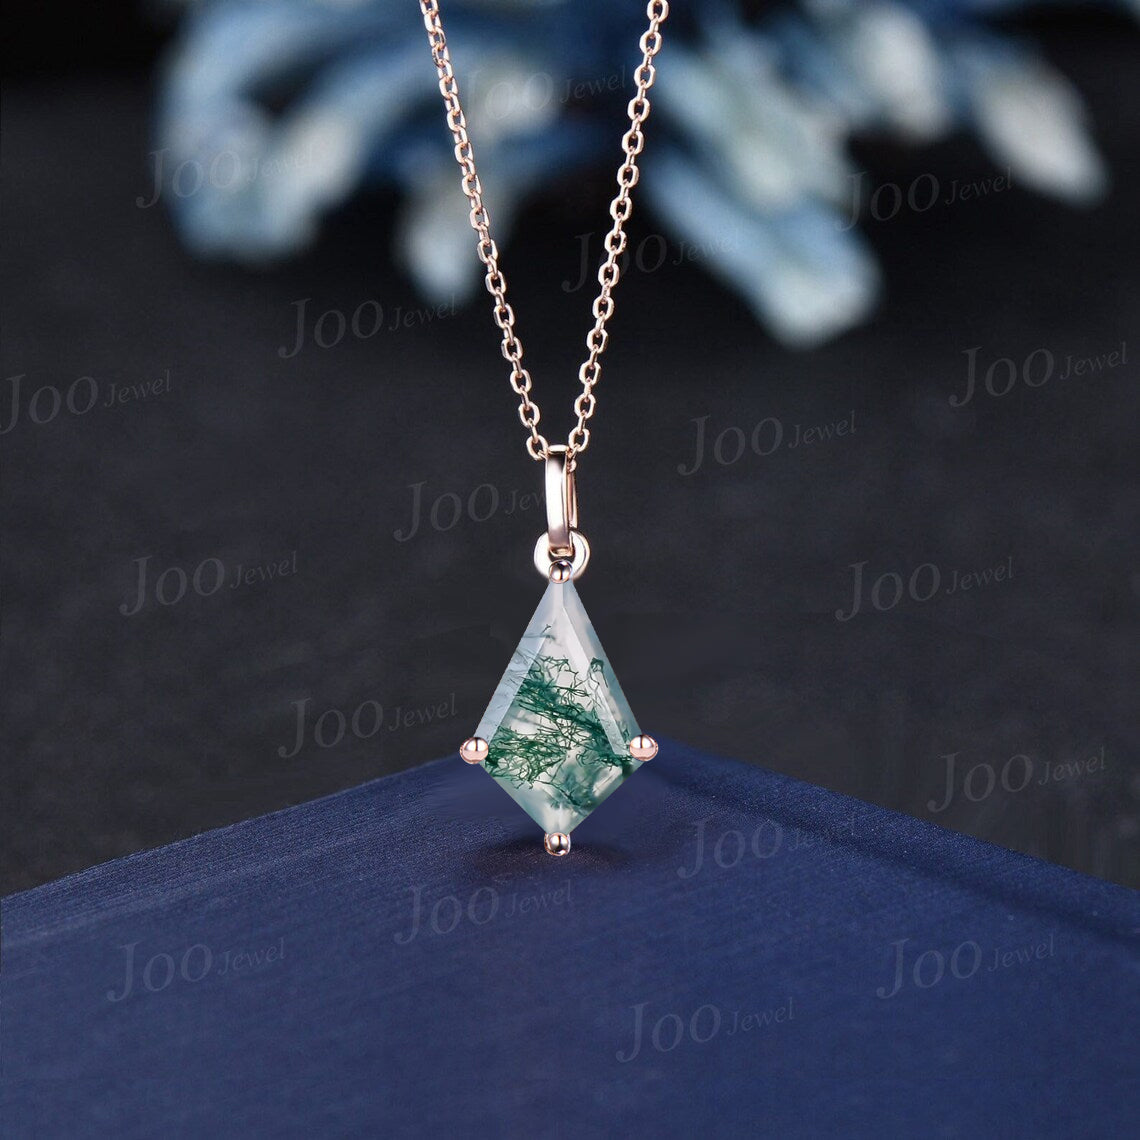 Natural Teardrop Moss Agate Necklace Silver/Solid 14k/18k Rose Gold Vintage Personalized Wedding Pendant For Women Anniversary Bridal Gifts